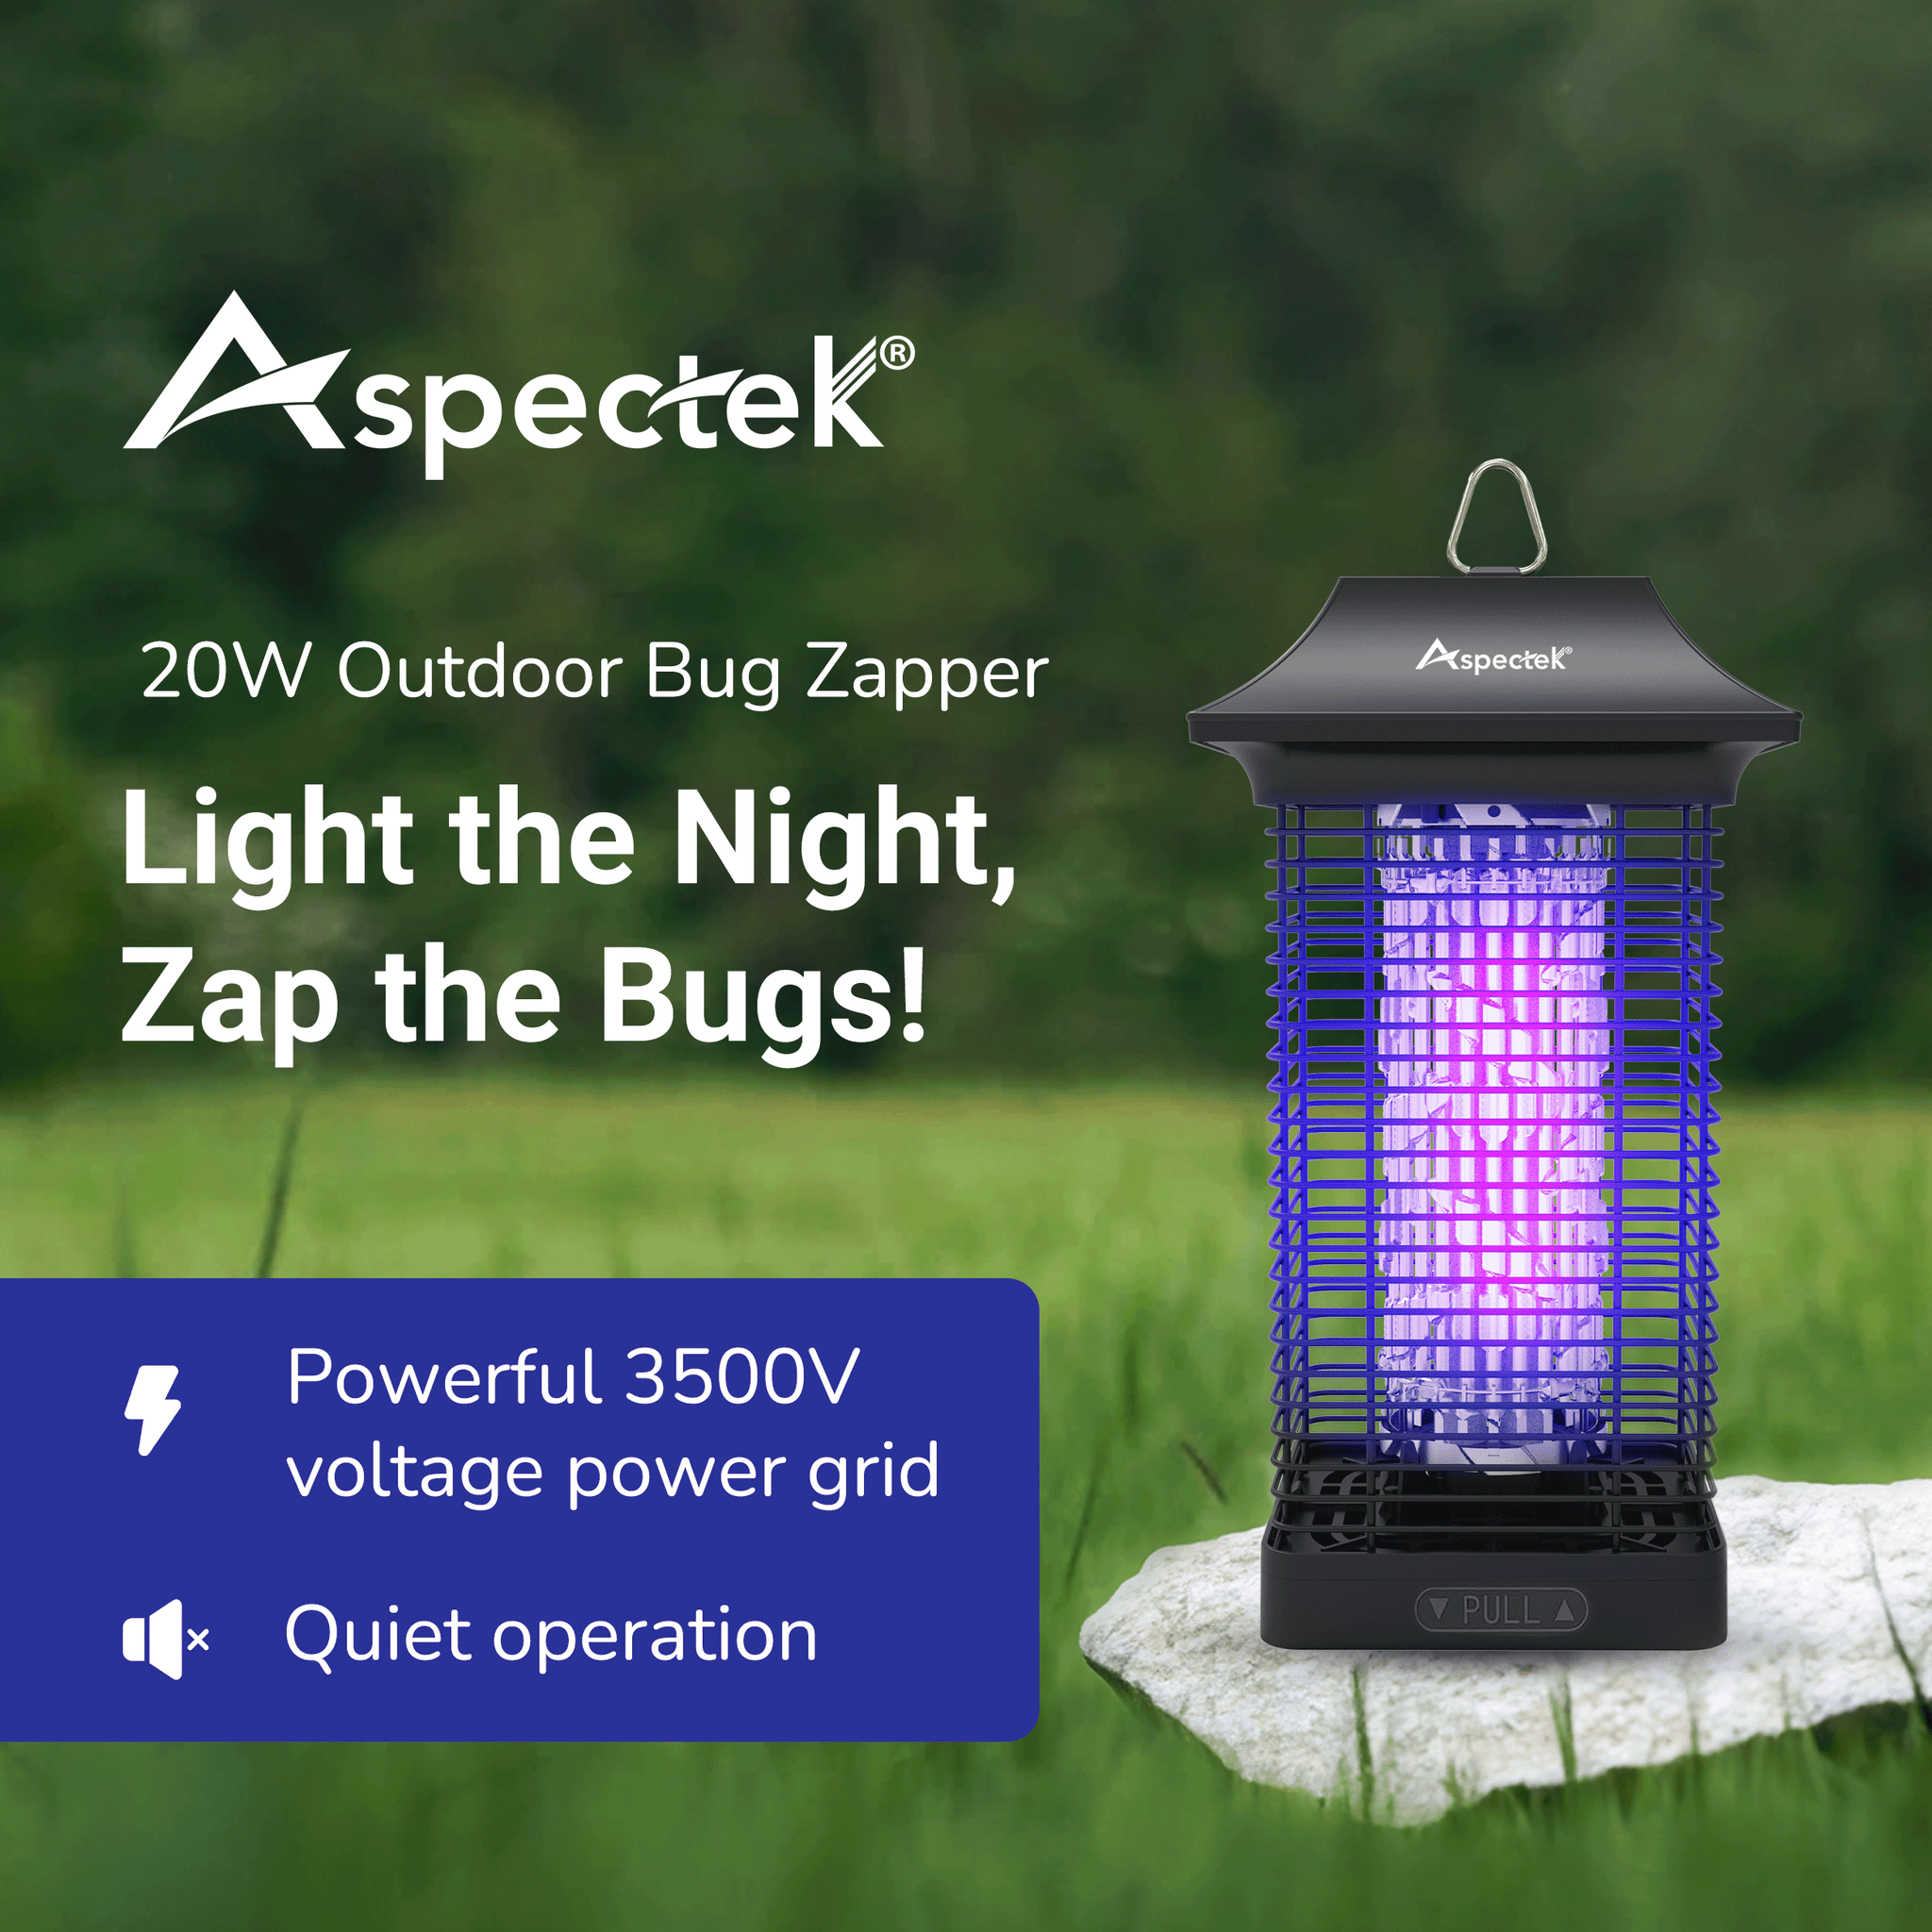 Aspectek Electric Bug Zapper Outdoor, Powerful Mosquito Zapper 20W, Insect Fly Zapper Indoor, UV Light Fly Killer for Home Patio Backyard Camping, Waterproof, Up to 1000sq. FT Coverage (Square)